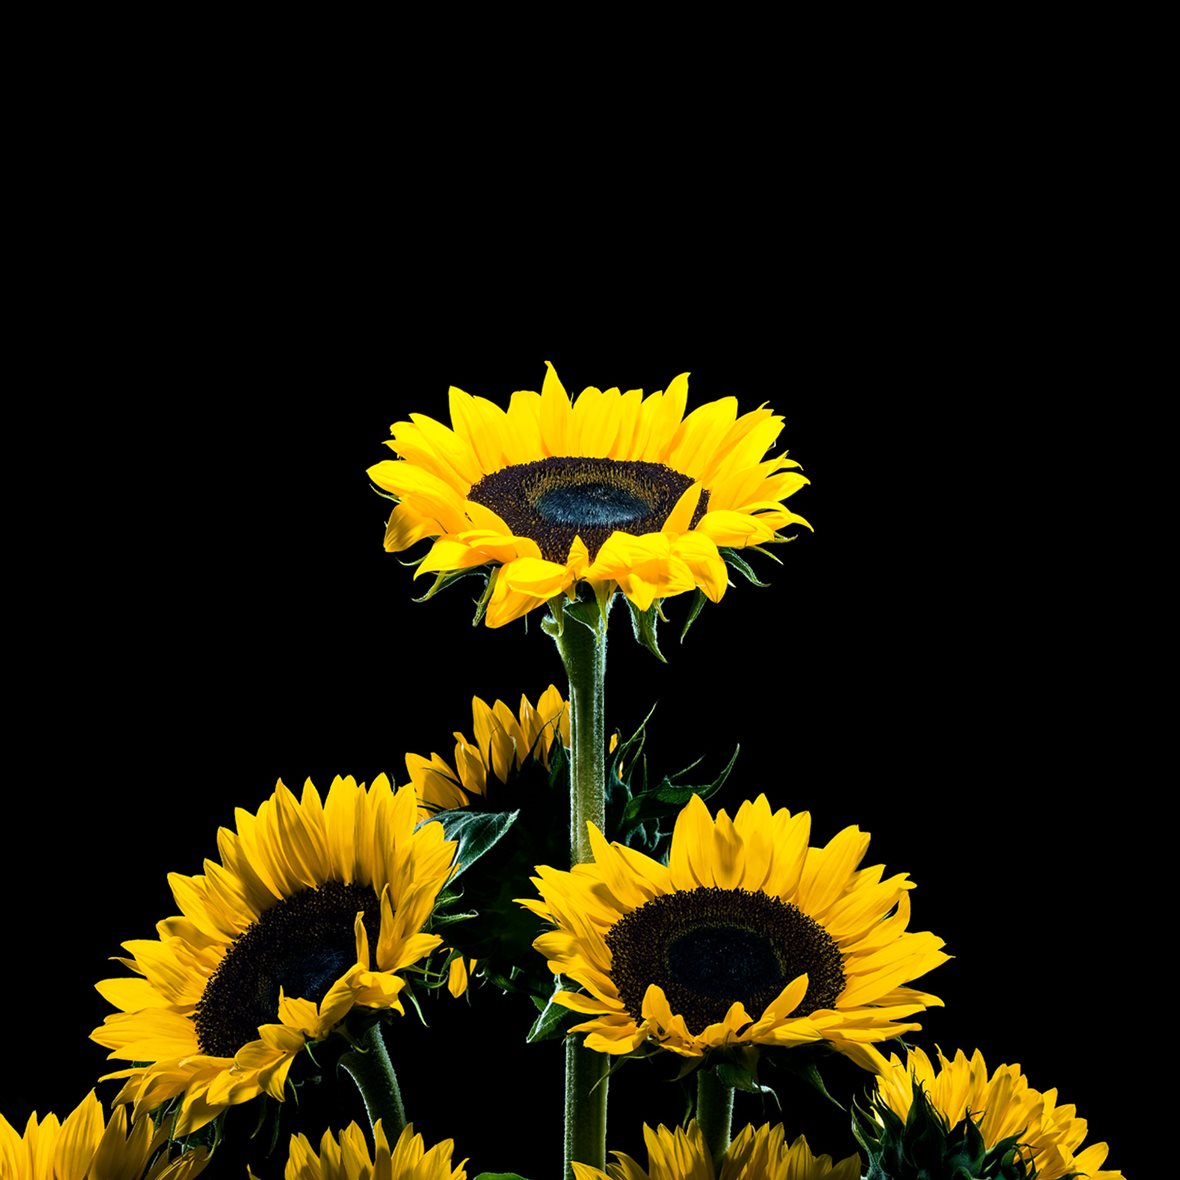 Sunflowers arranged in a pyramid shape